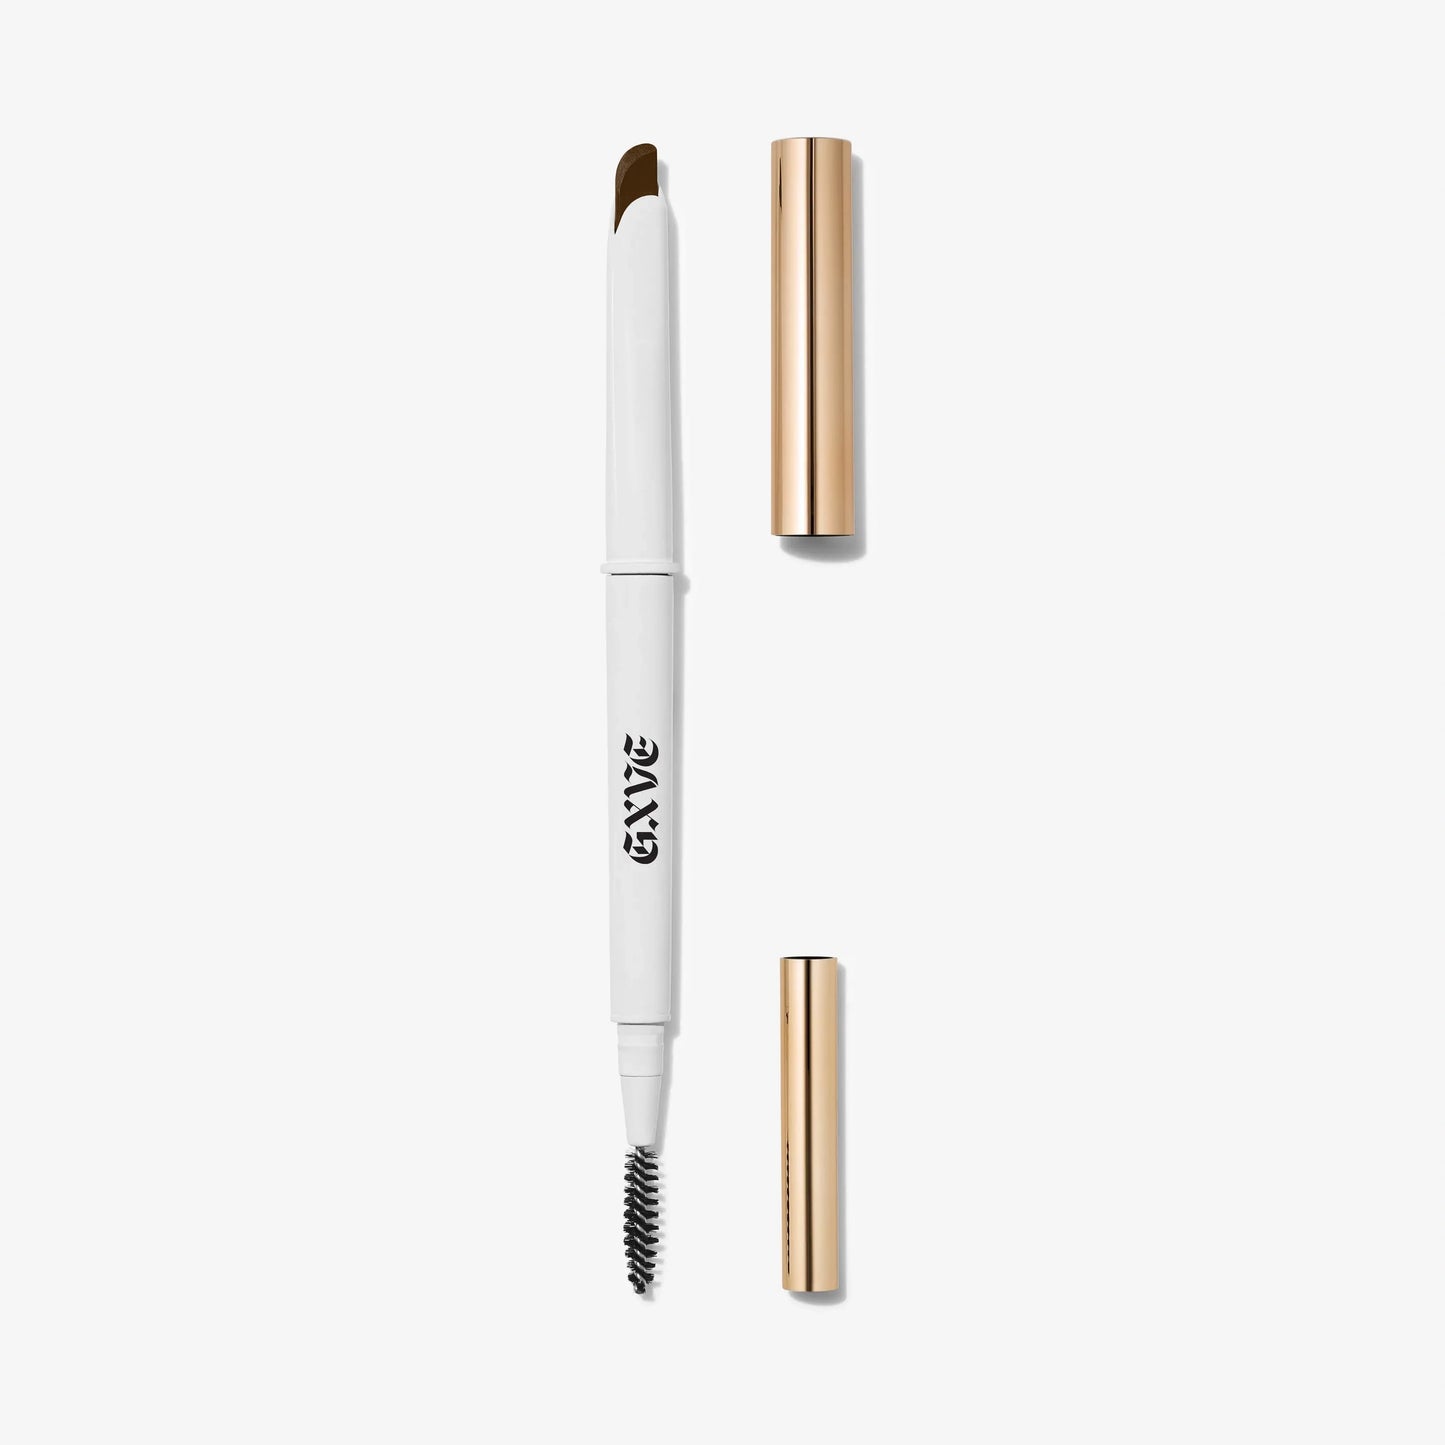 GXVE 6 - Instant Definition Sculpting Eyebrow Pencil For Bold Brows